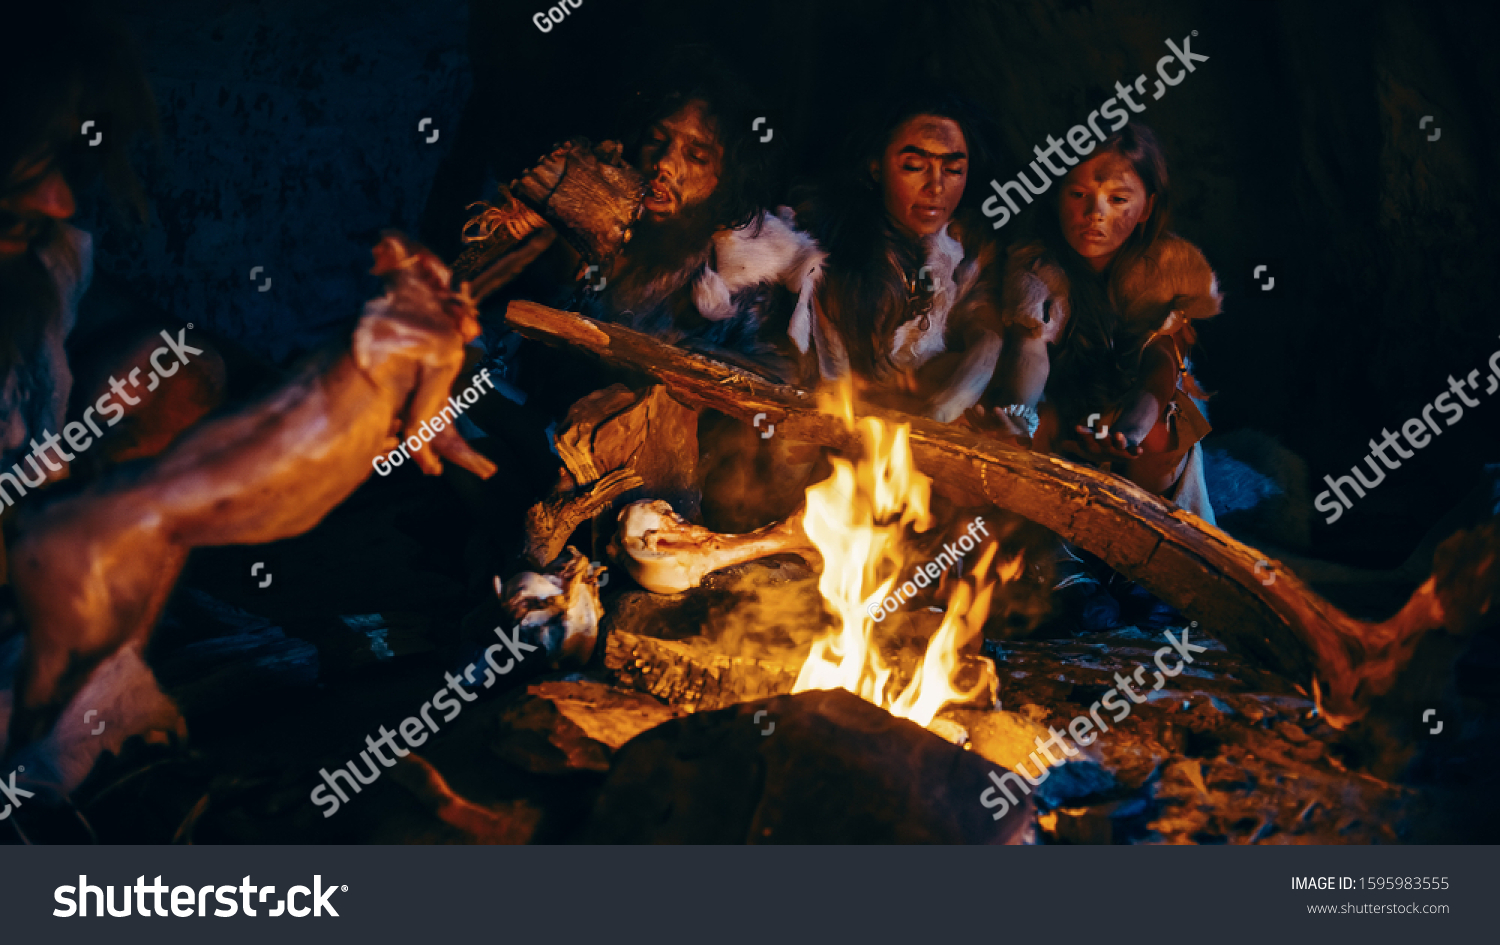 Neanderthal or Homo Sapiens Family Cooking Animal Meat over Bonfire and then Eating it. Tribe of Prehistoric Hunter-Gatherers Wearing Animal Skins Eating in a Dark Scary Cave at Night #1595983555